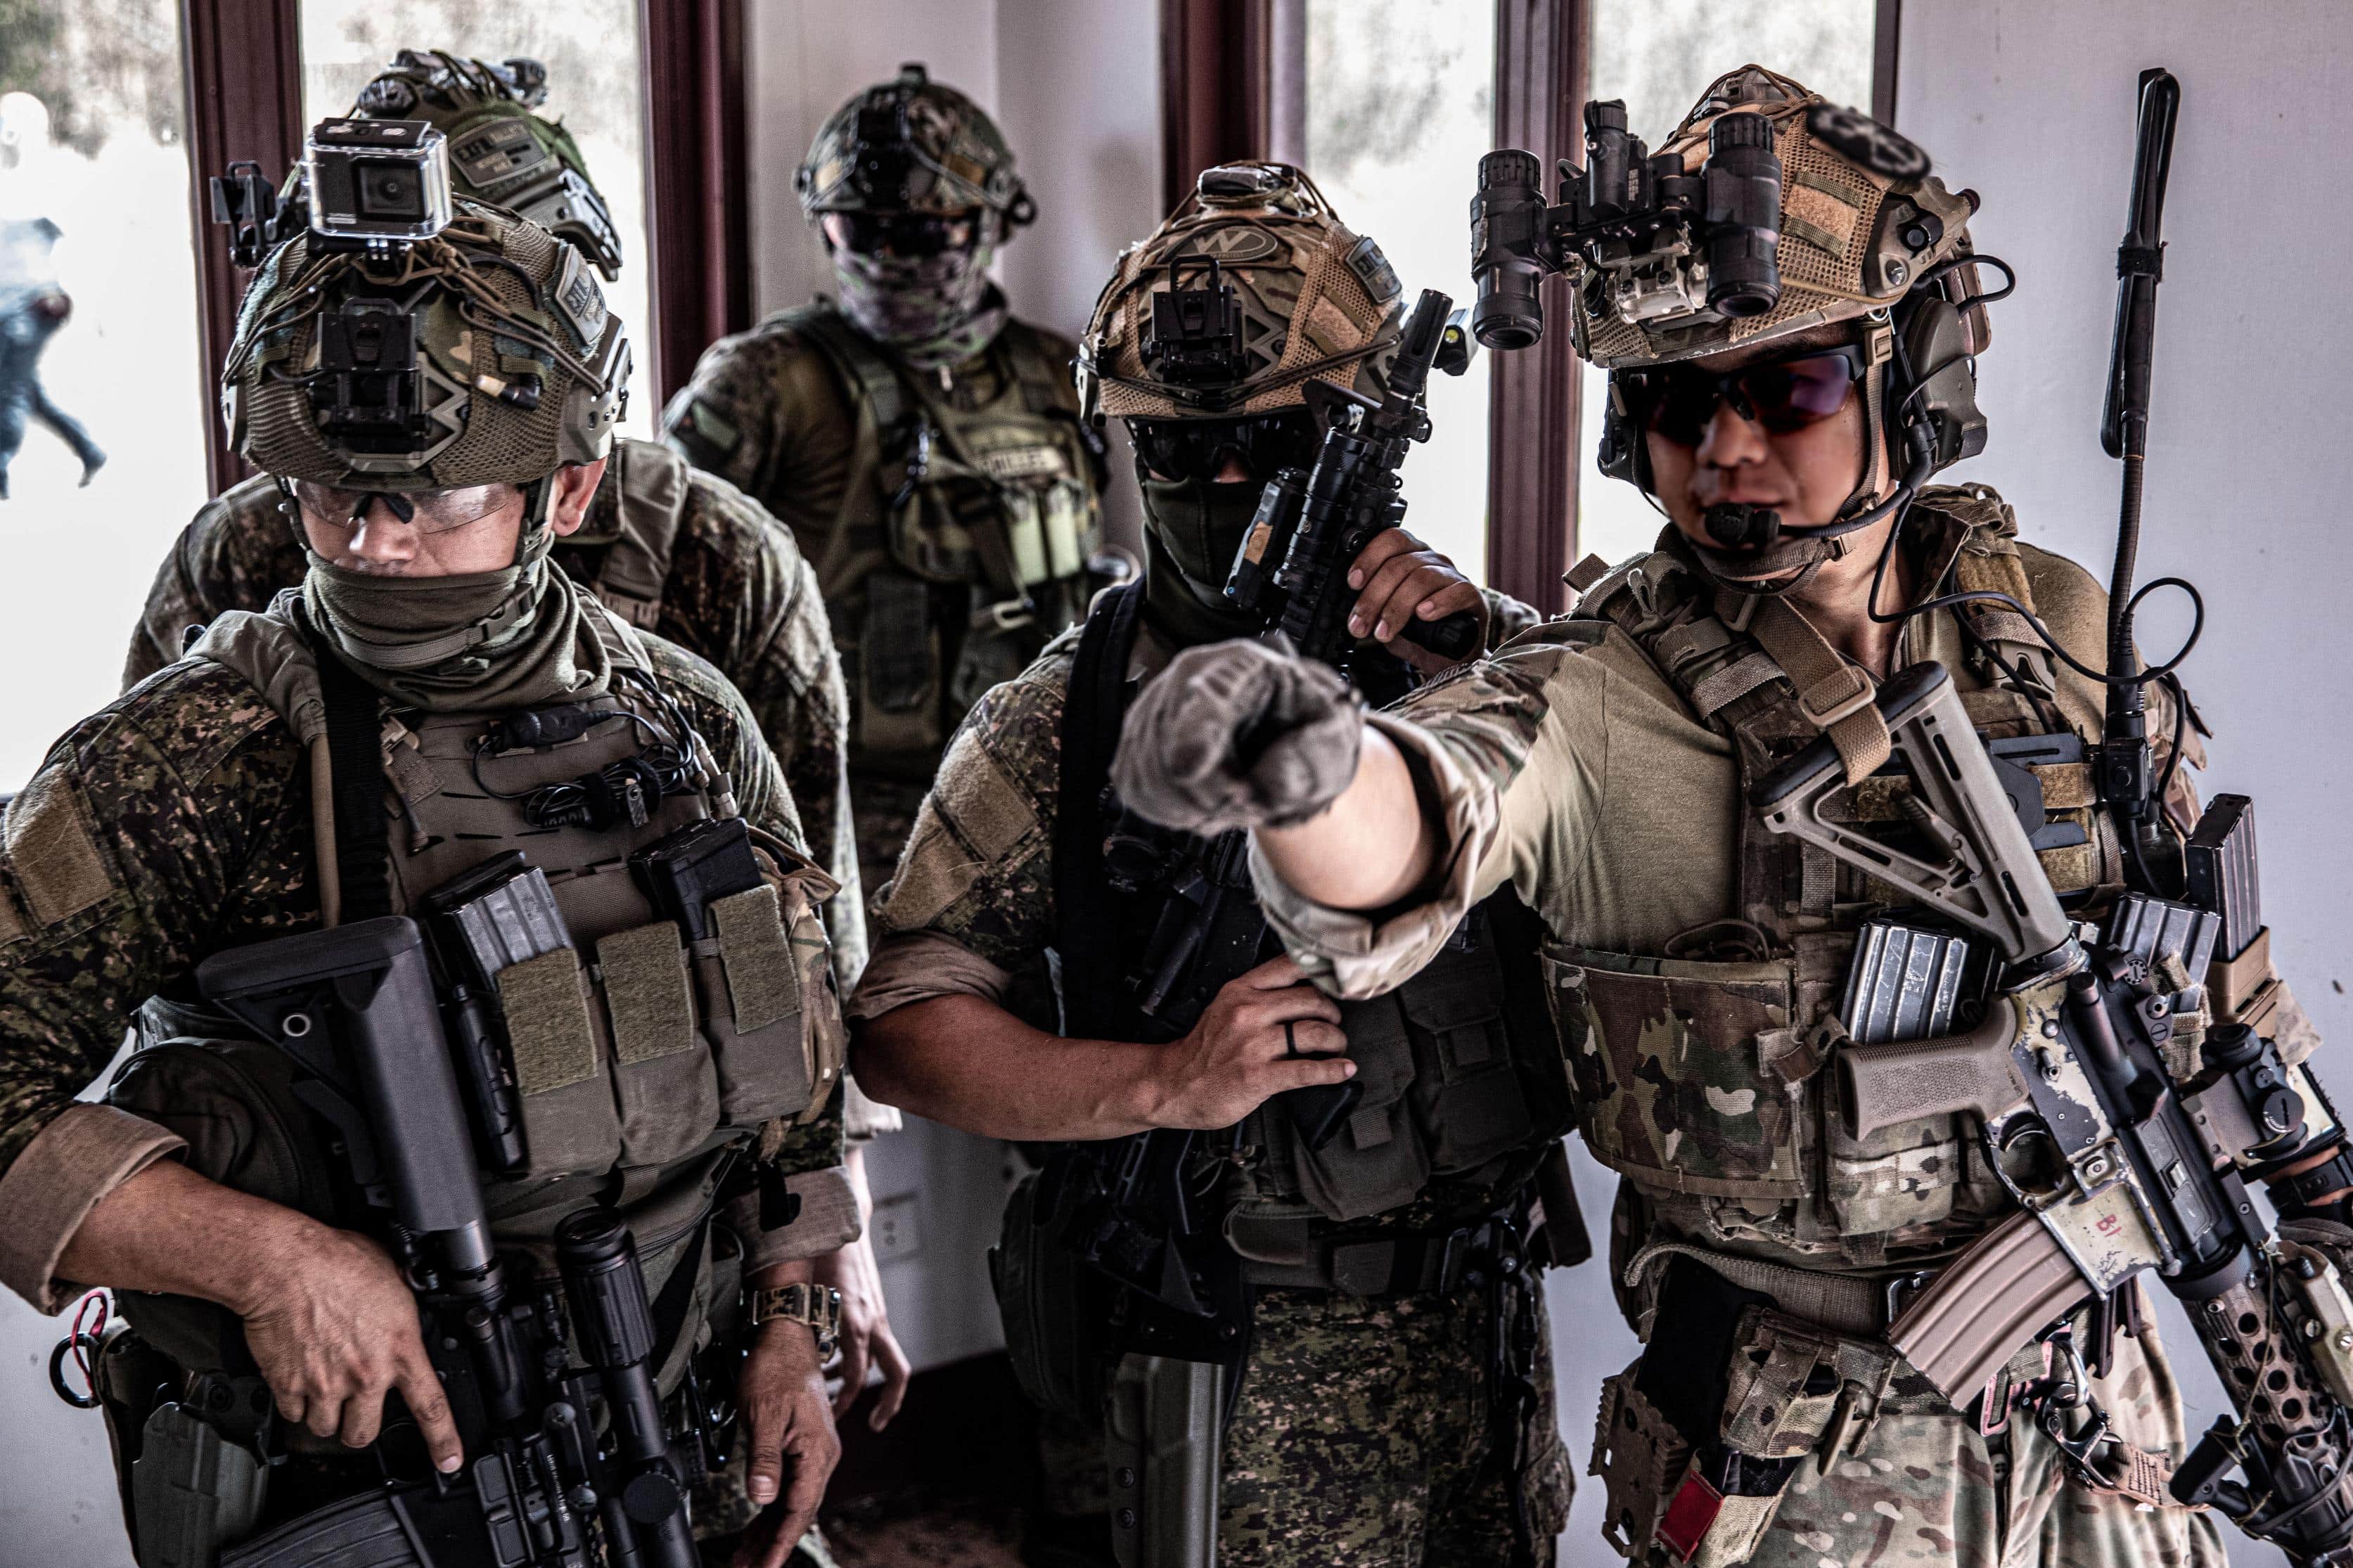 MANILA, Philippines- A Green Beret with the 1st Special Forces Group (Airborne) and Philippine Marines discuss security placement after securing a building during a simulated raid April 7, 2022. The U.S. and Philippines share a long history of collaboration toward shared values, and our alliance is further strengthened by cultural exchanges and strong people-to-people ties. (U.S. Army Photo by Sgt. 1st Class Ryan Hohman) (This photo was altered for security purposes)